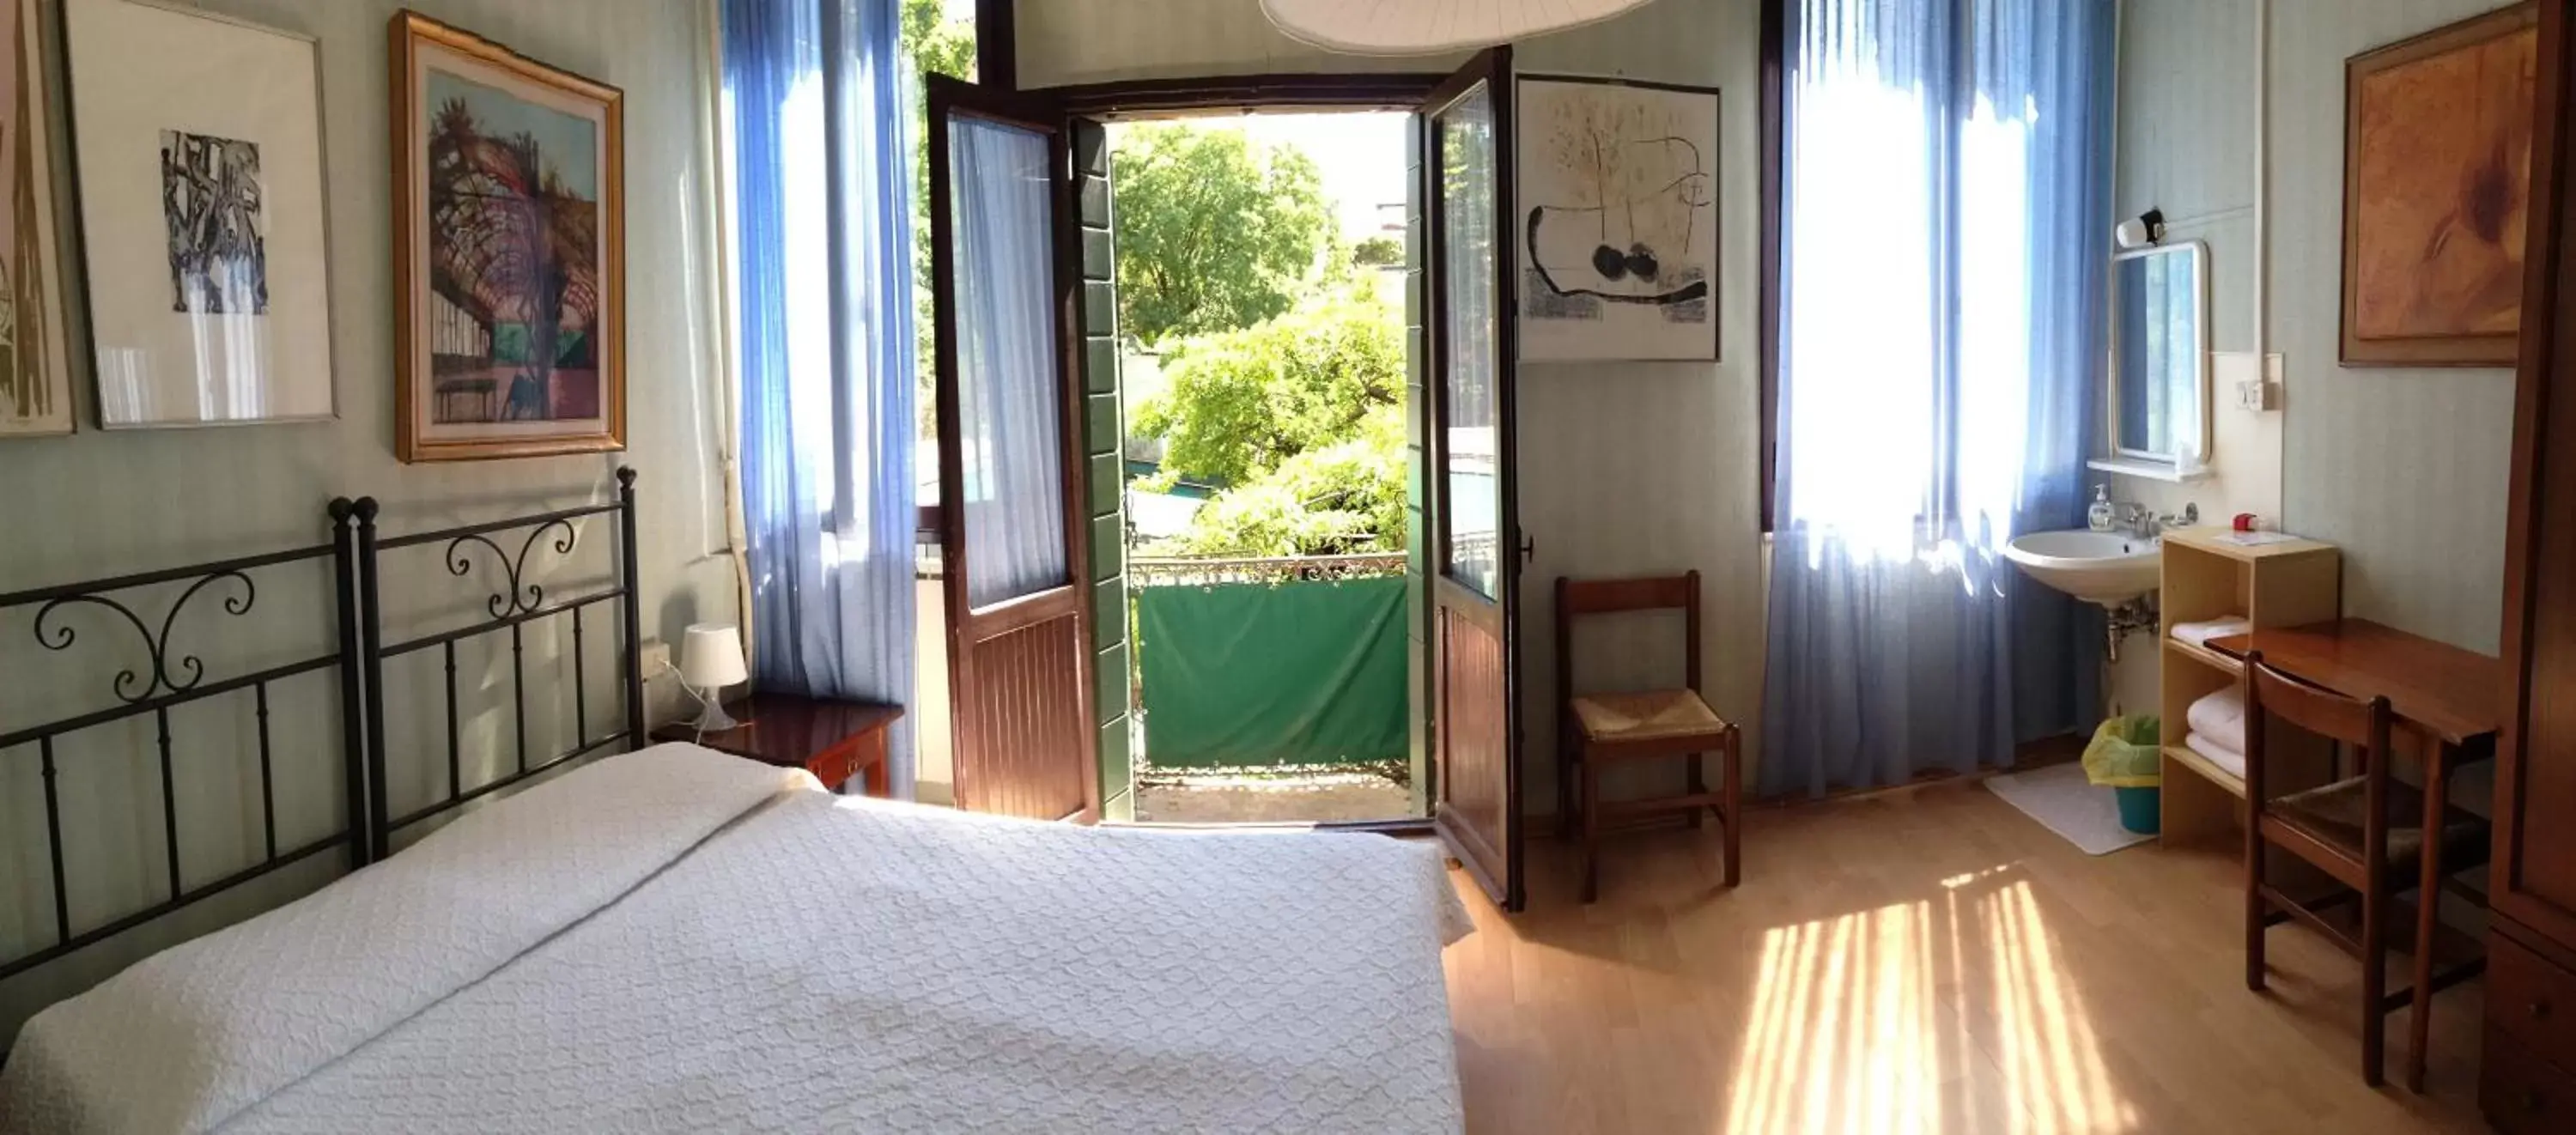 Double Room with Shared Bathroom in Antica Locanda Montin